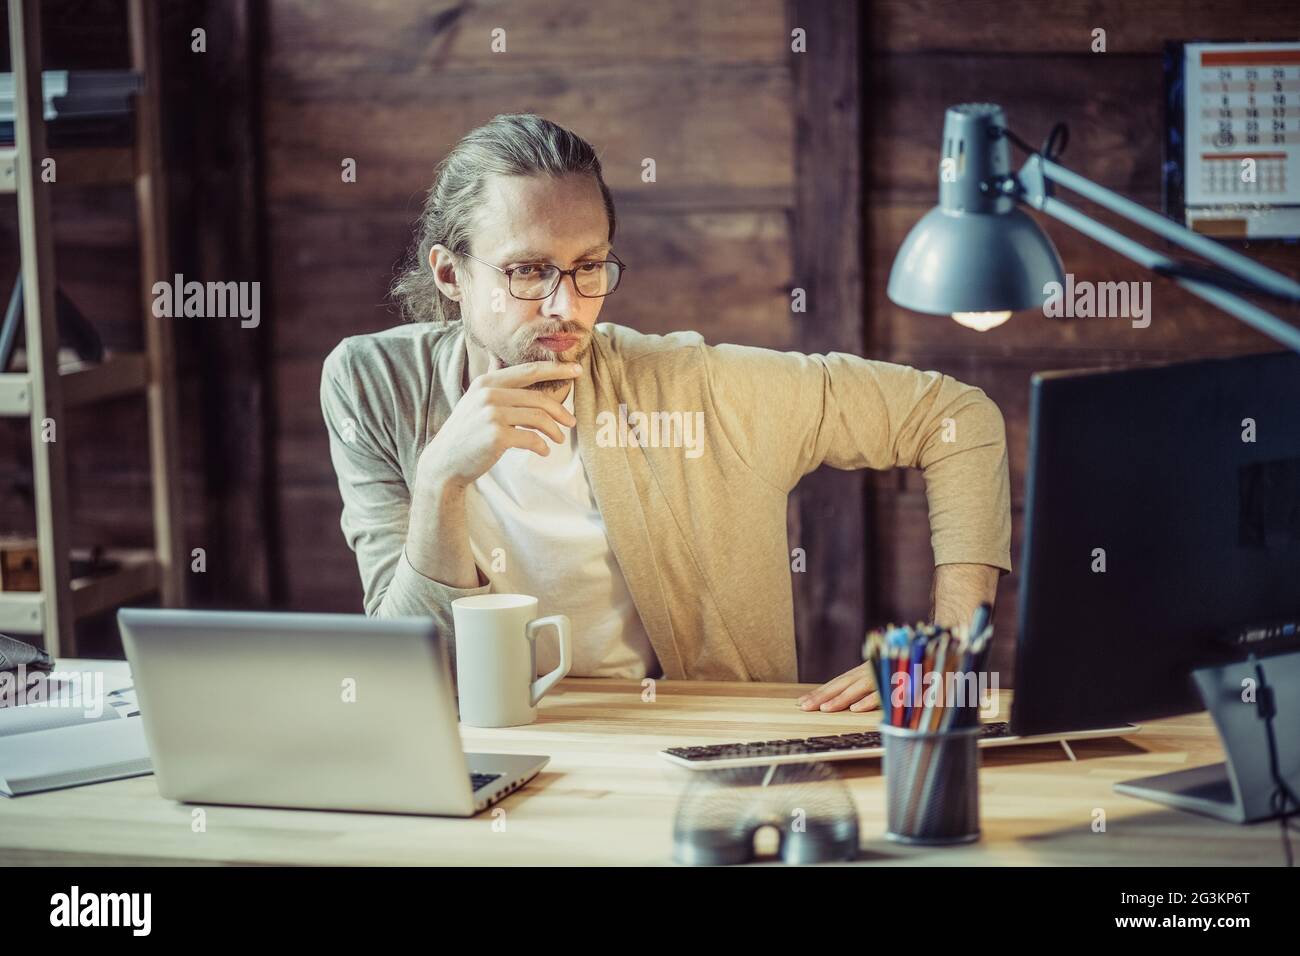 Freelancer thoughtfully looking in computer. Stock Photo